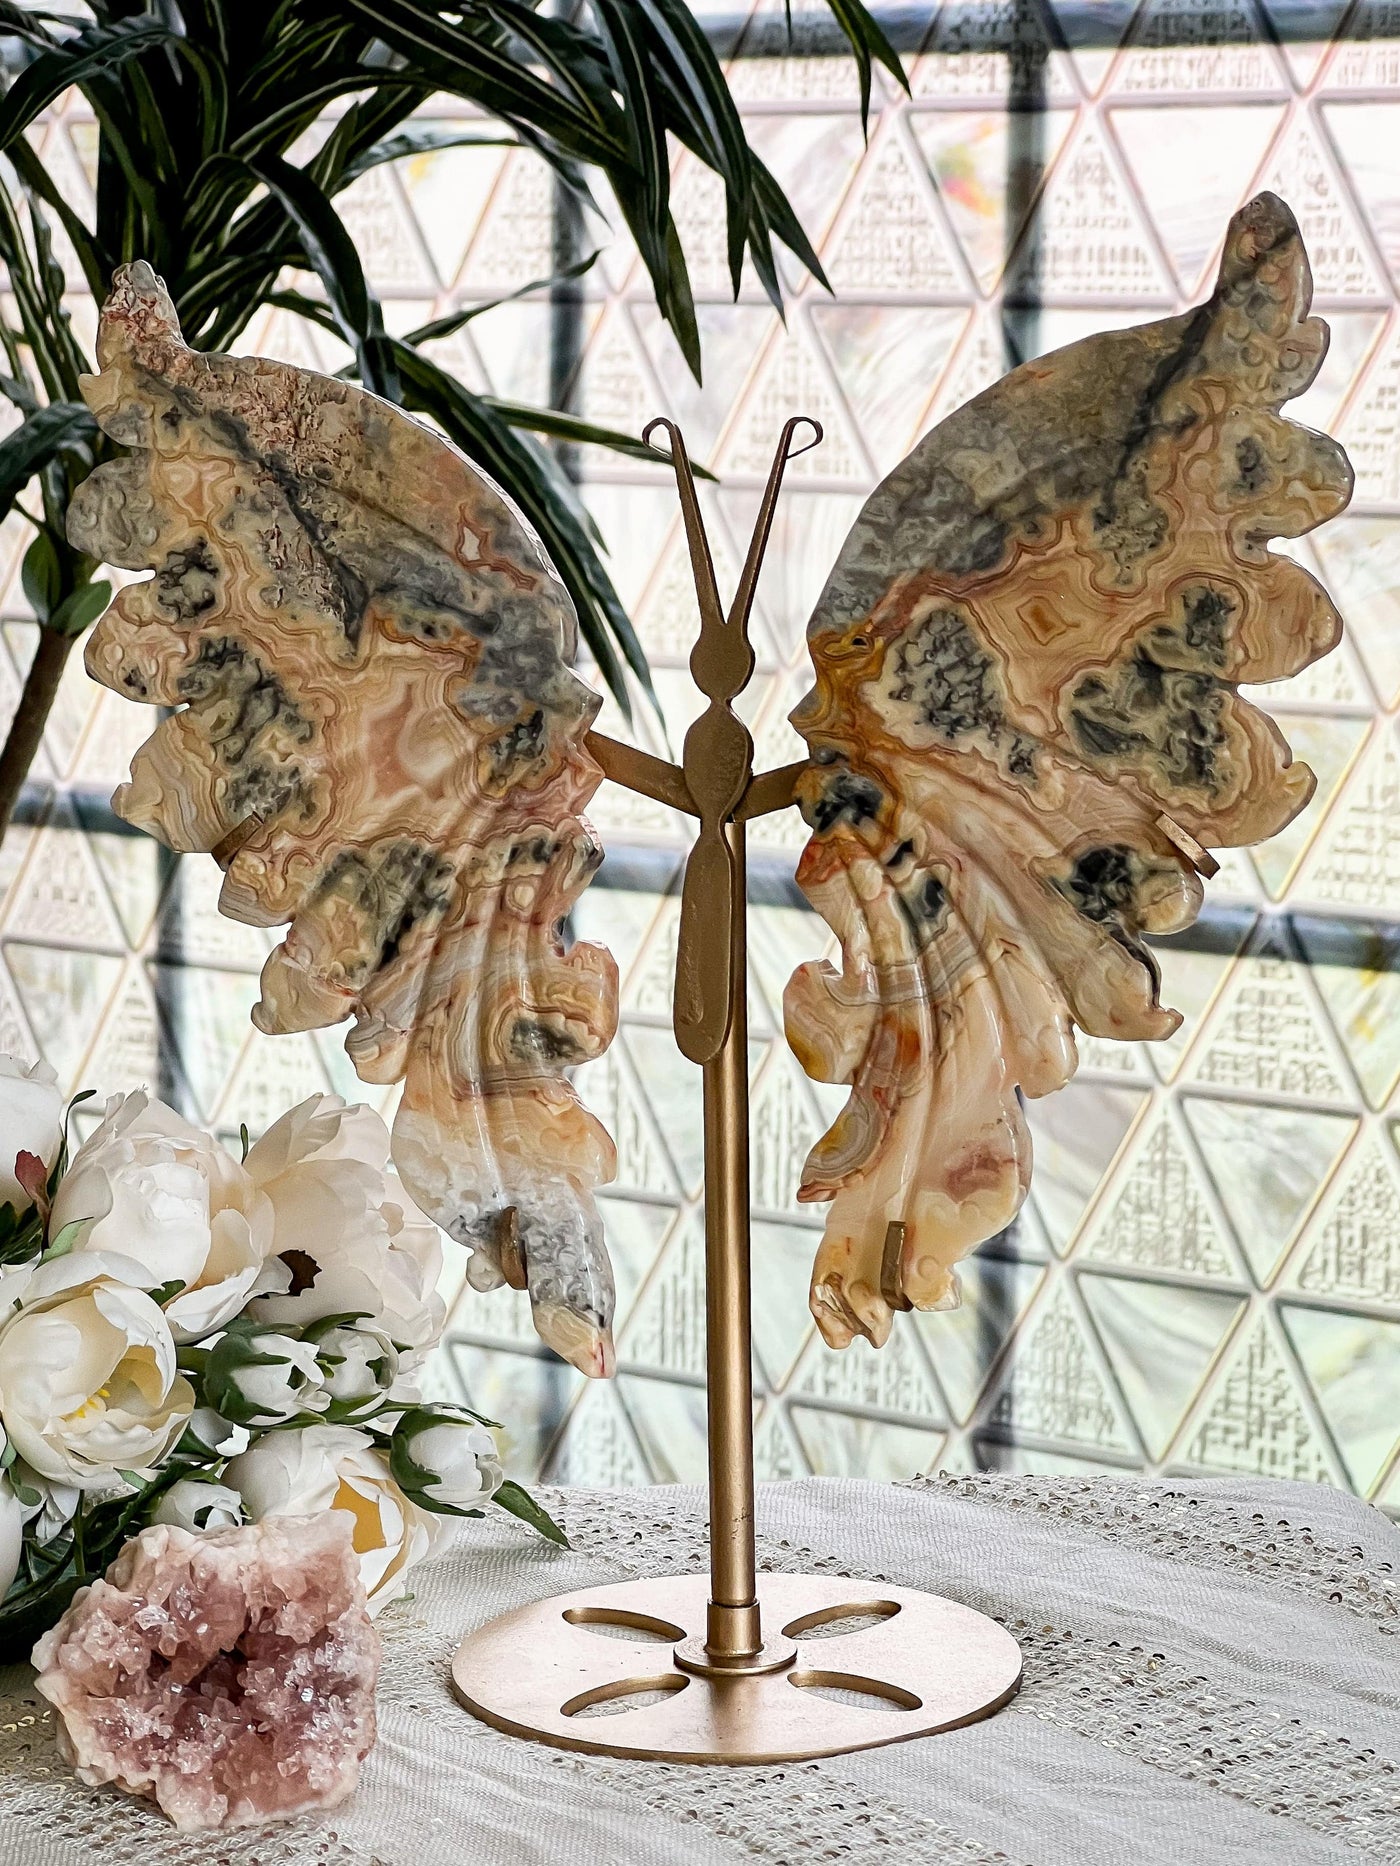 YELLOW CRAZY LACE AGATE BUTTERFLY WINGS ON STAND Revive In Style Vintage Furniture Painted Refinished Redesign Beautiful One of a Kind Artistic Antique Unique Home Decor Interior Design French Country Shabby Chic Cottage Farmhouse Grandmillenial Coastal Chalk Paint Metallic Glam Eclectic Quality Dovetailed Rustic Furniture Painter Pinterest Bedroom Living Room Entryway Kitchen Home Trends House Styles Decorating ideas